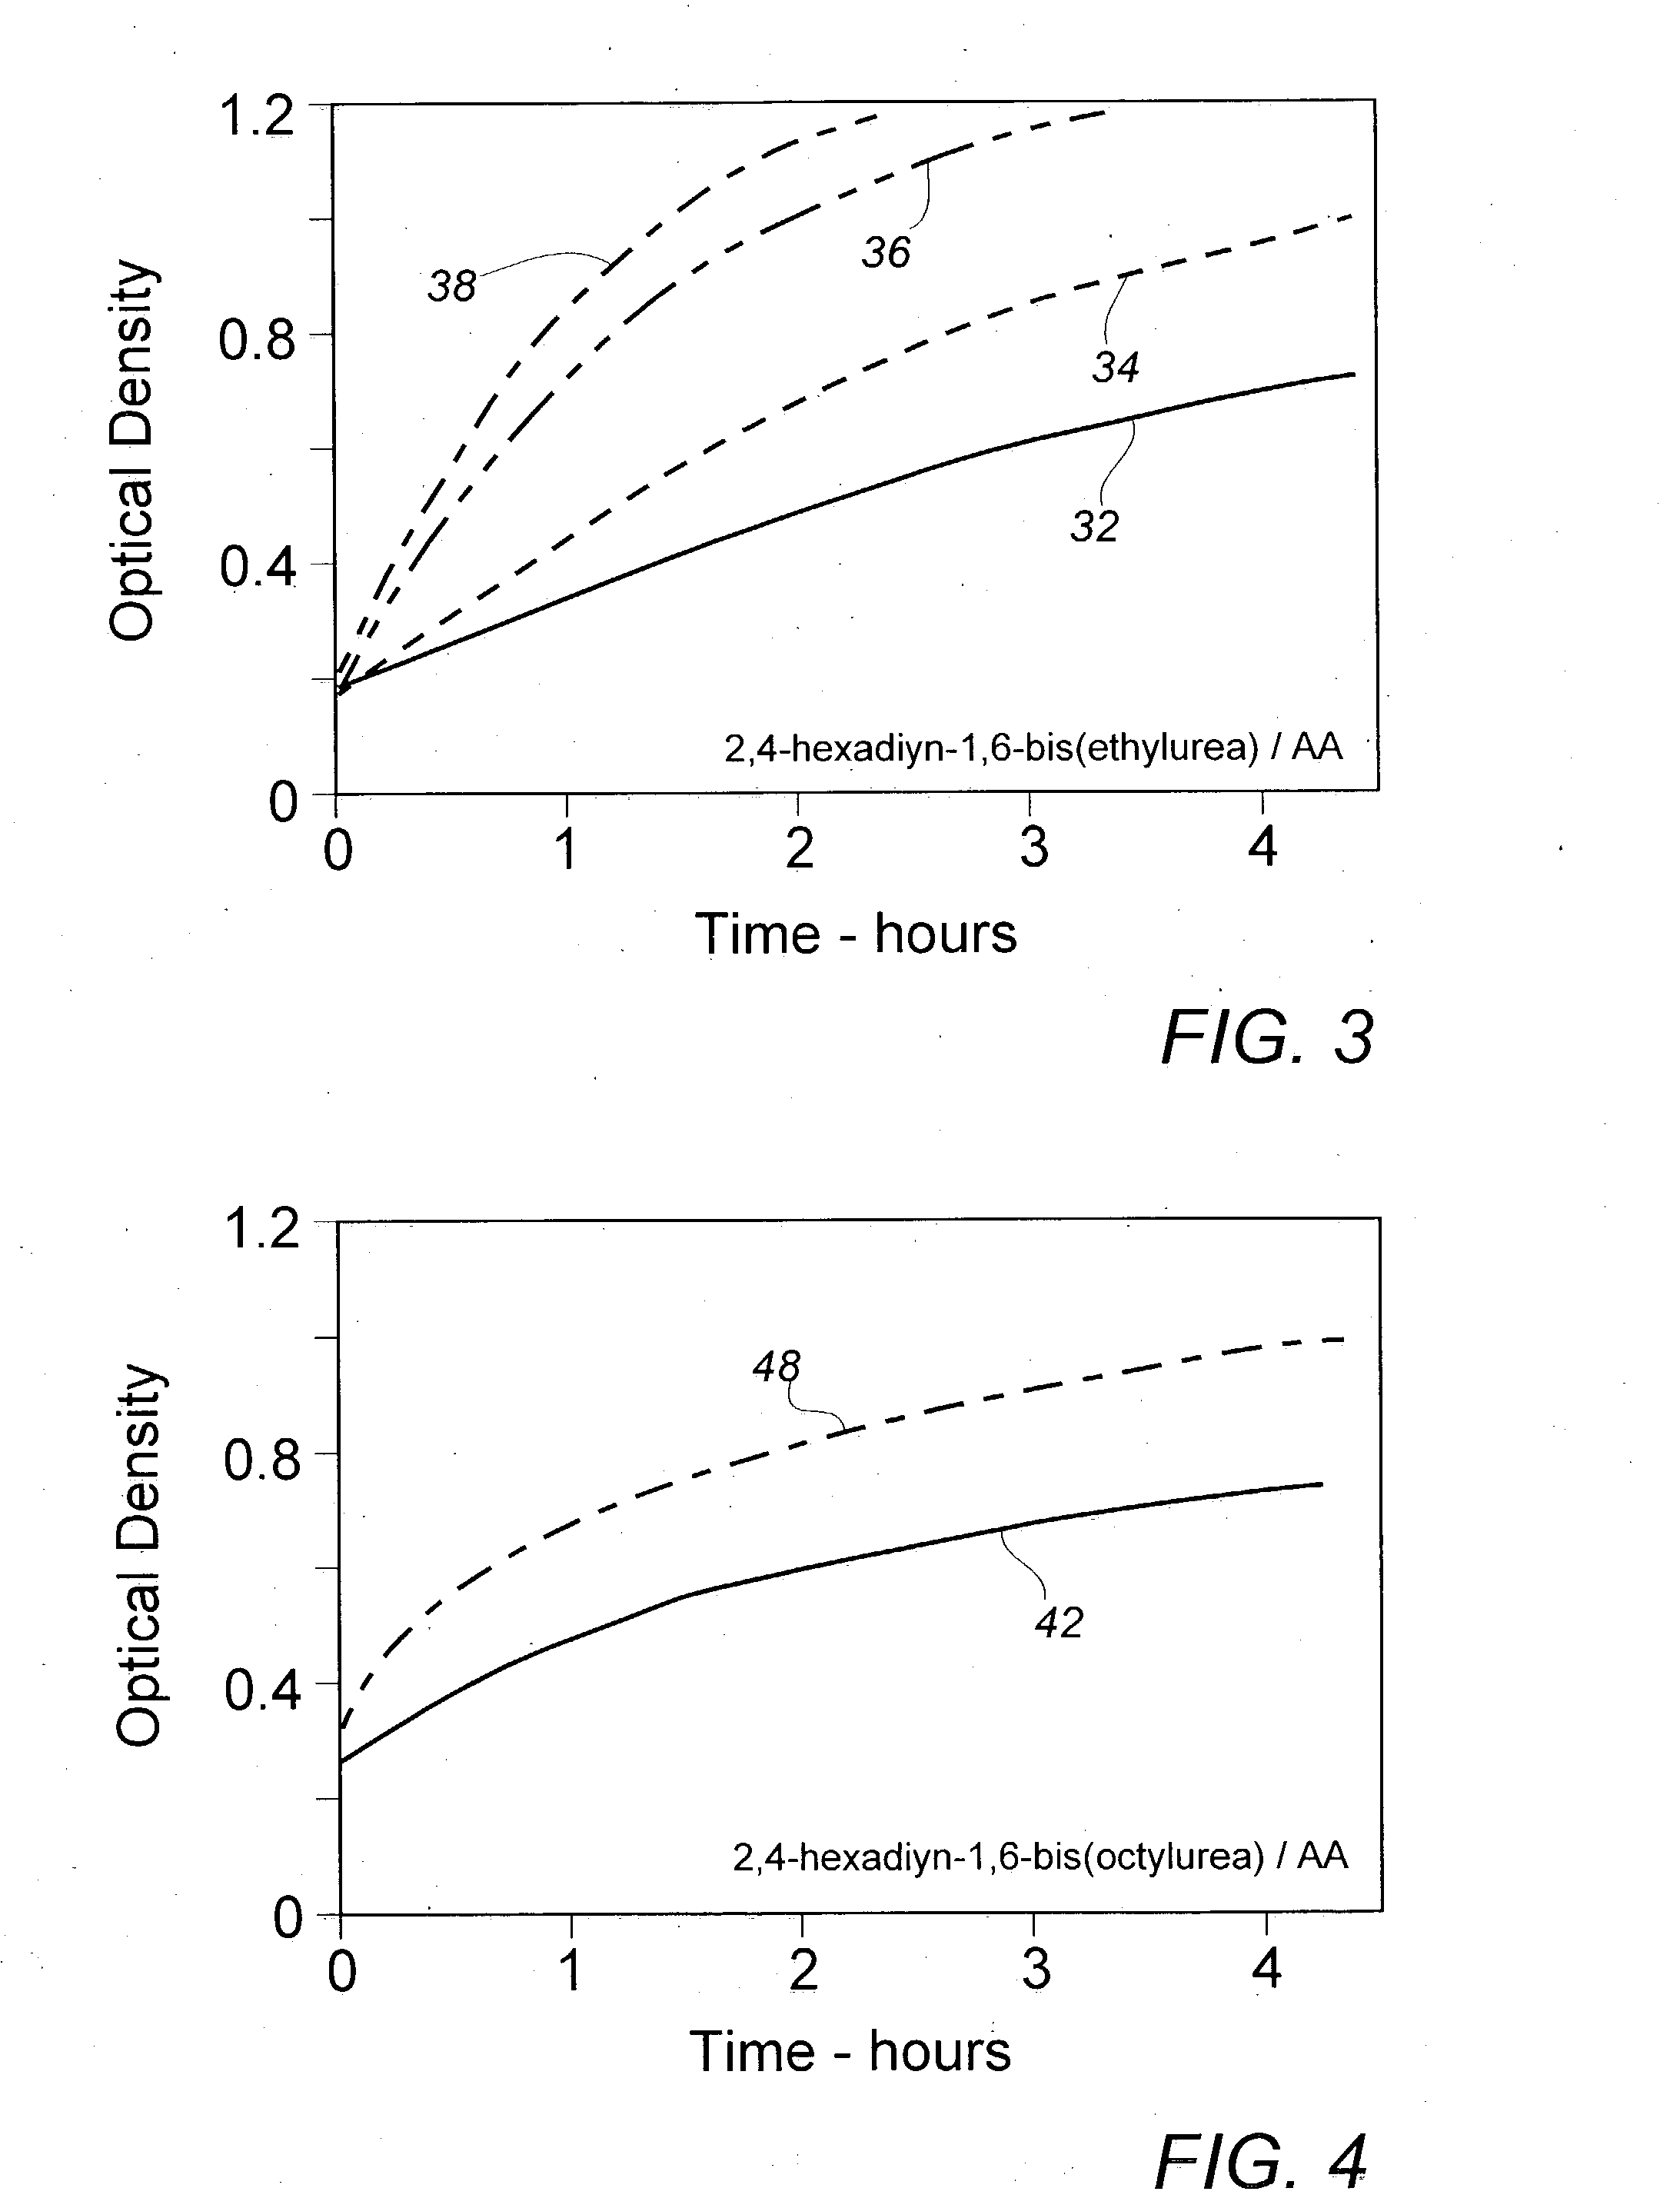 Reactivity control in substituted diacetylenic monomer shelf life monitoring systems